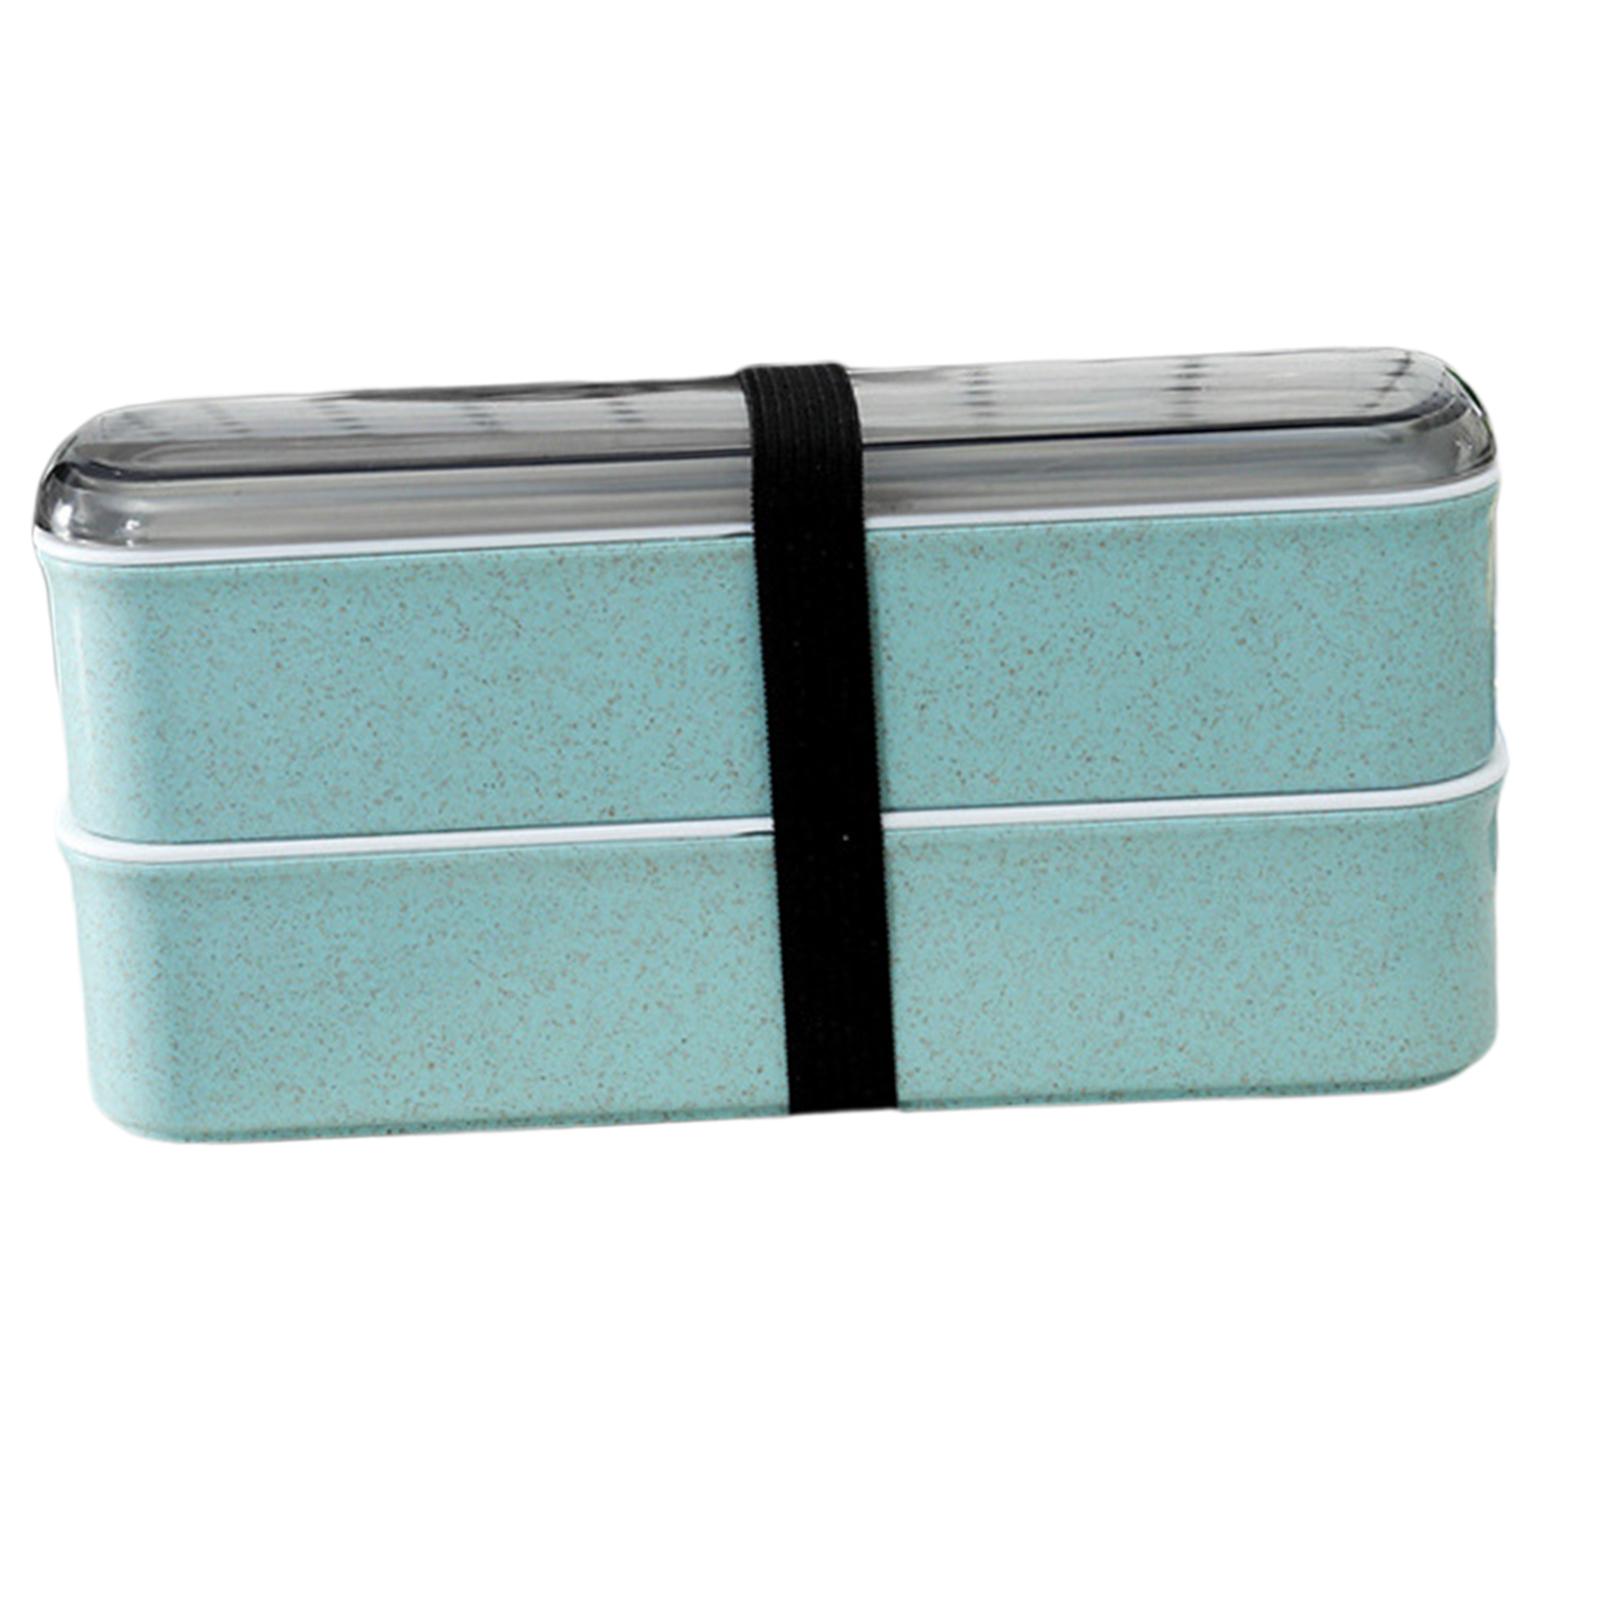 Japanese Style Leakproof Lunch Container Meal Snack Box Lunch Box Food Storage Container